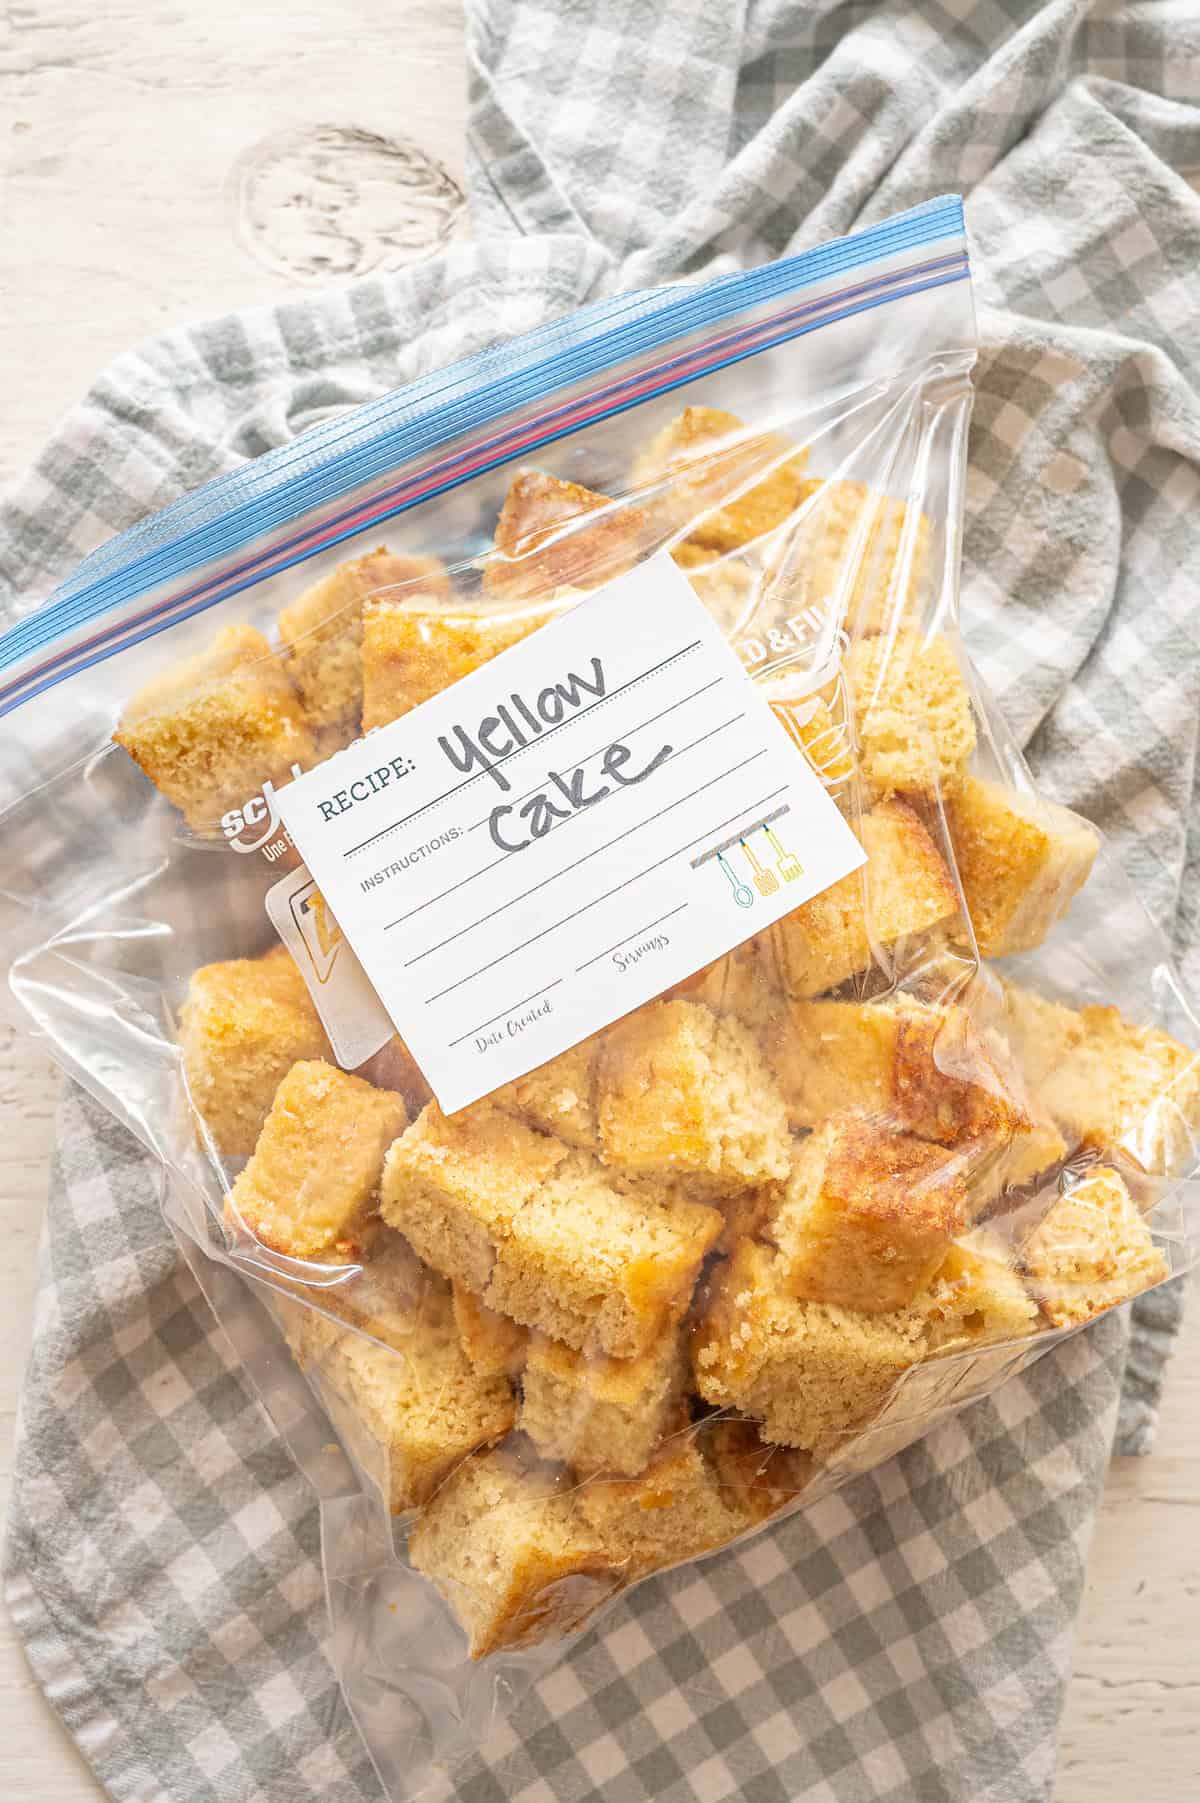 Yellow cake cut into cubes in a freezer bag.